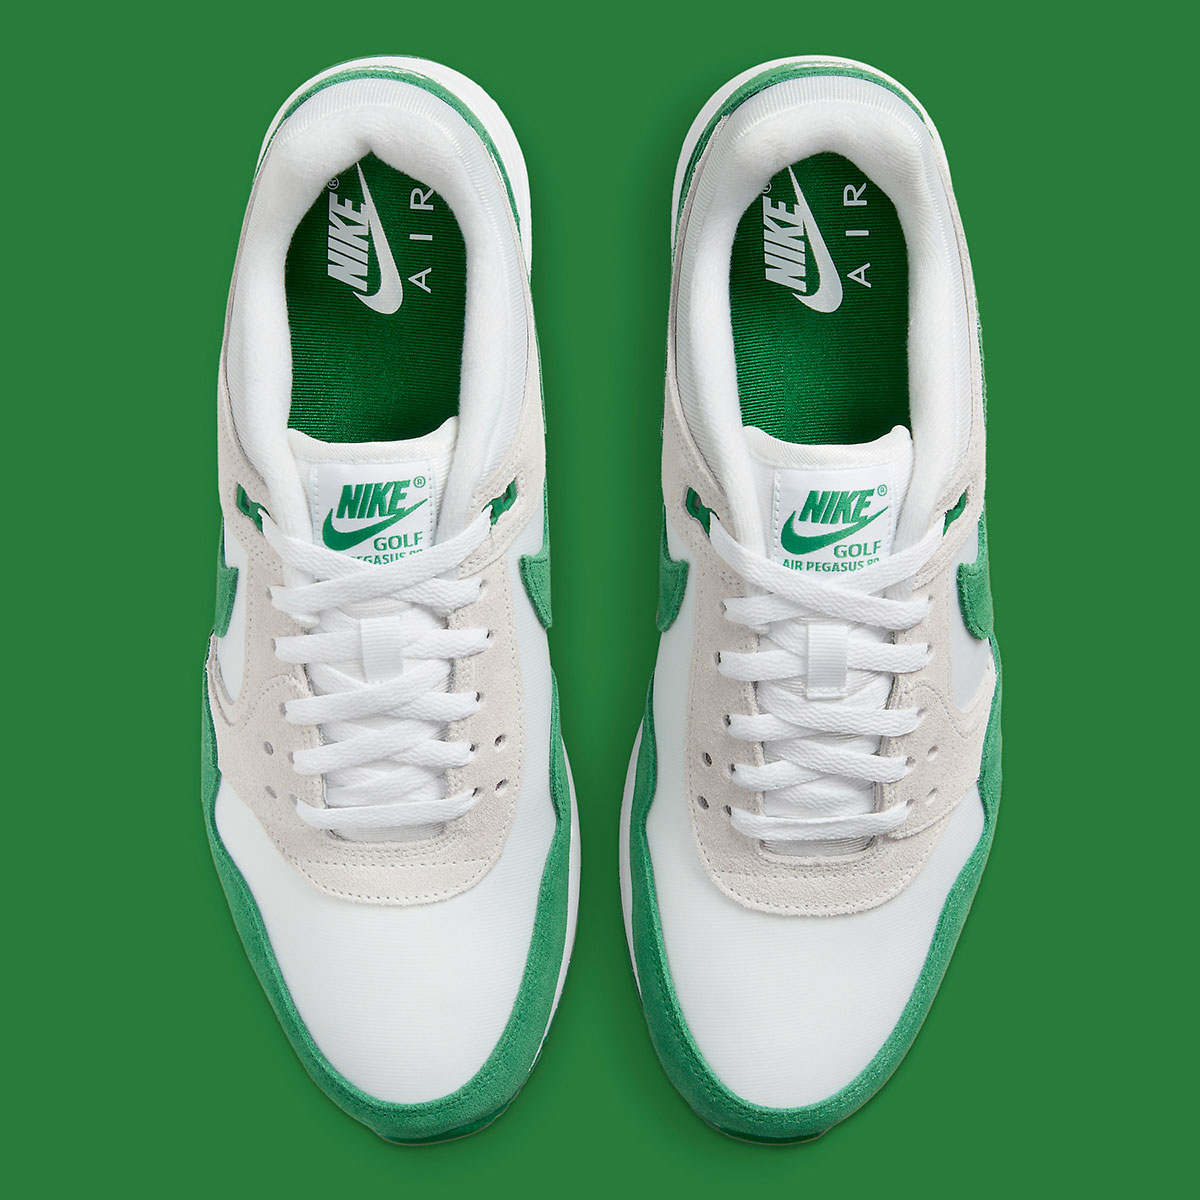 Nike Dunk Low GS is back in Bright Spruce Marina for kids Golf Malachite White Fj2245 102 3